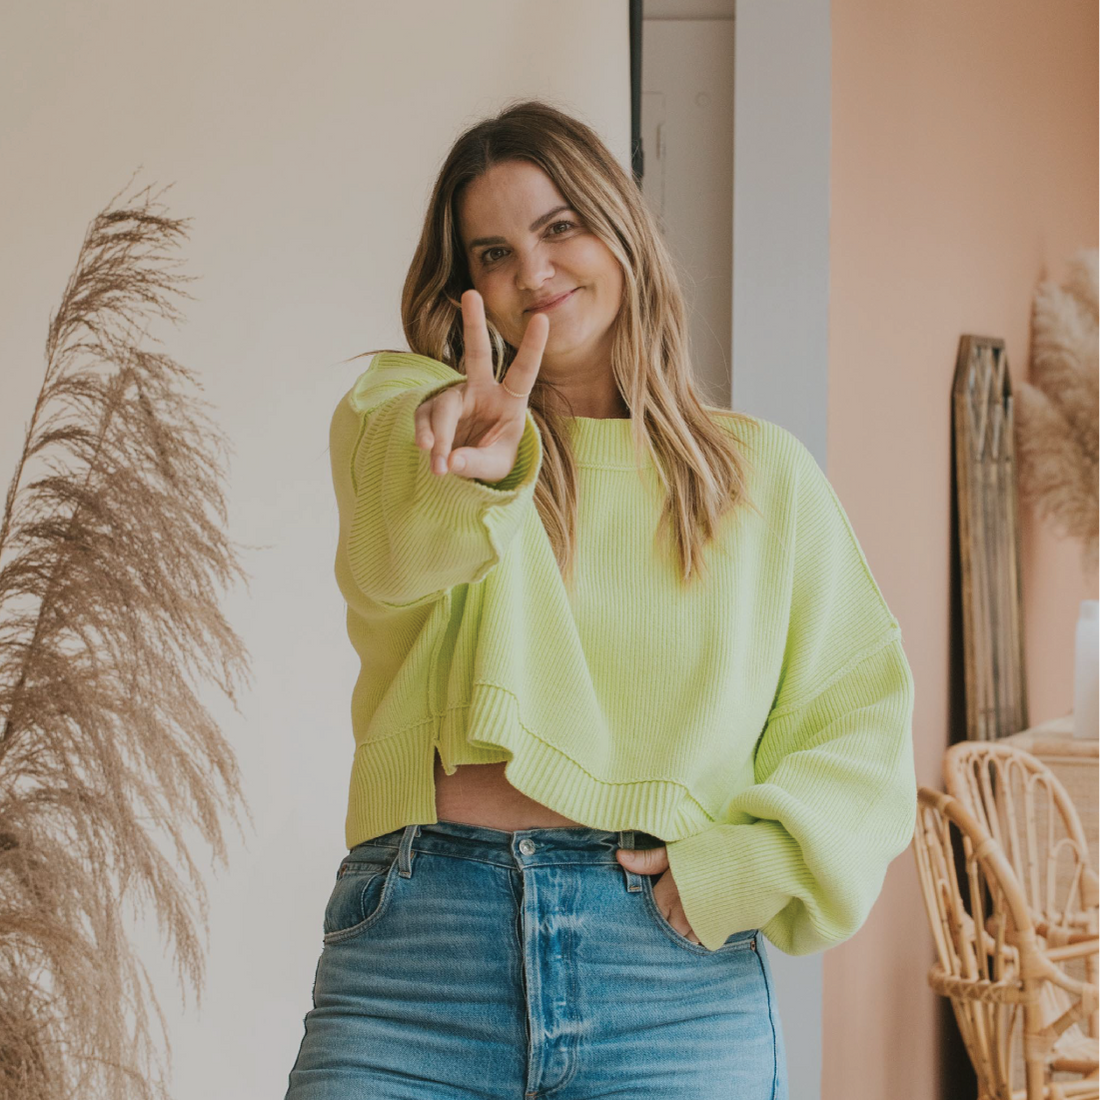 Jess, founder of Hello Adorn shares her Spring trend favorites and spring staples.